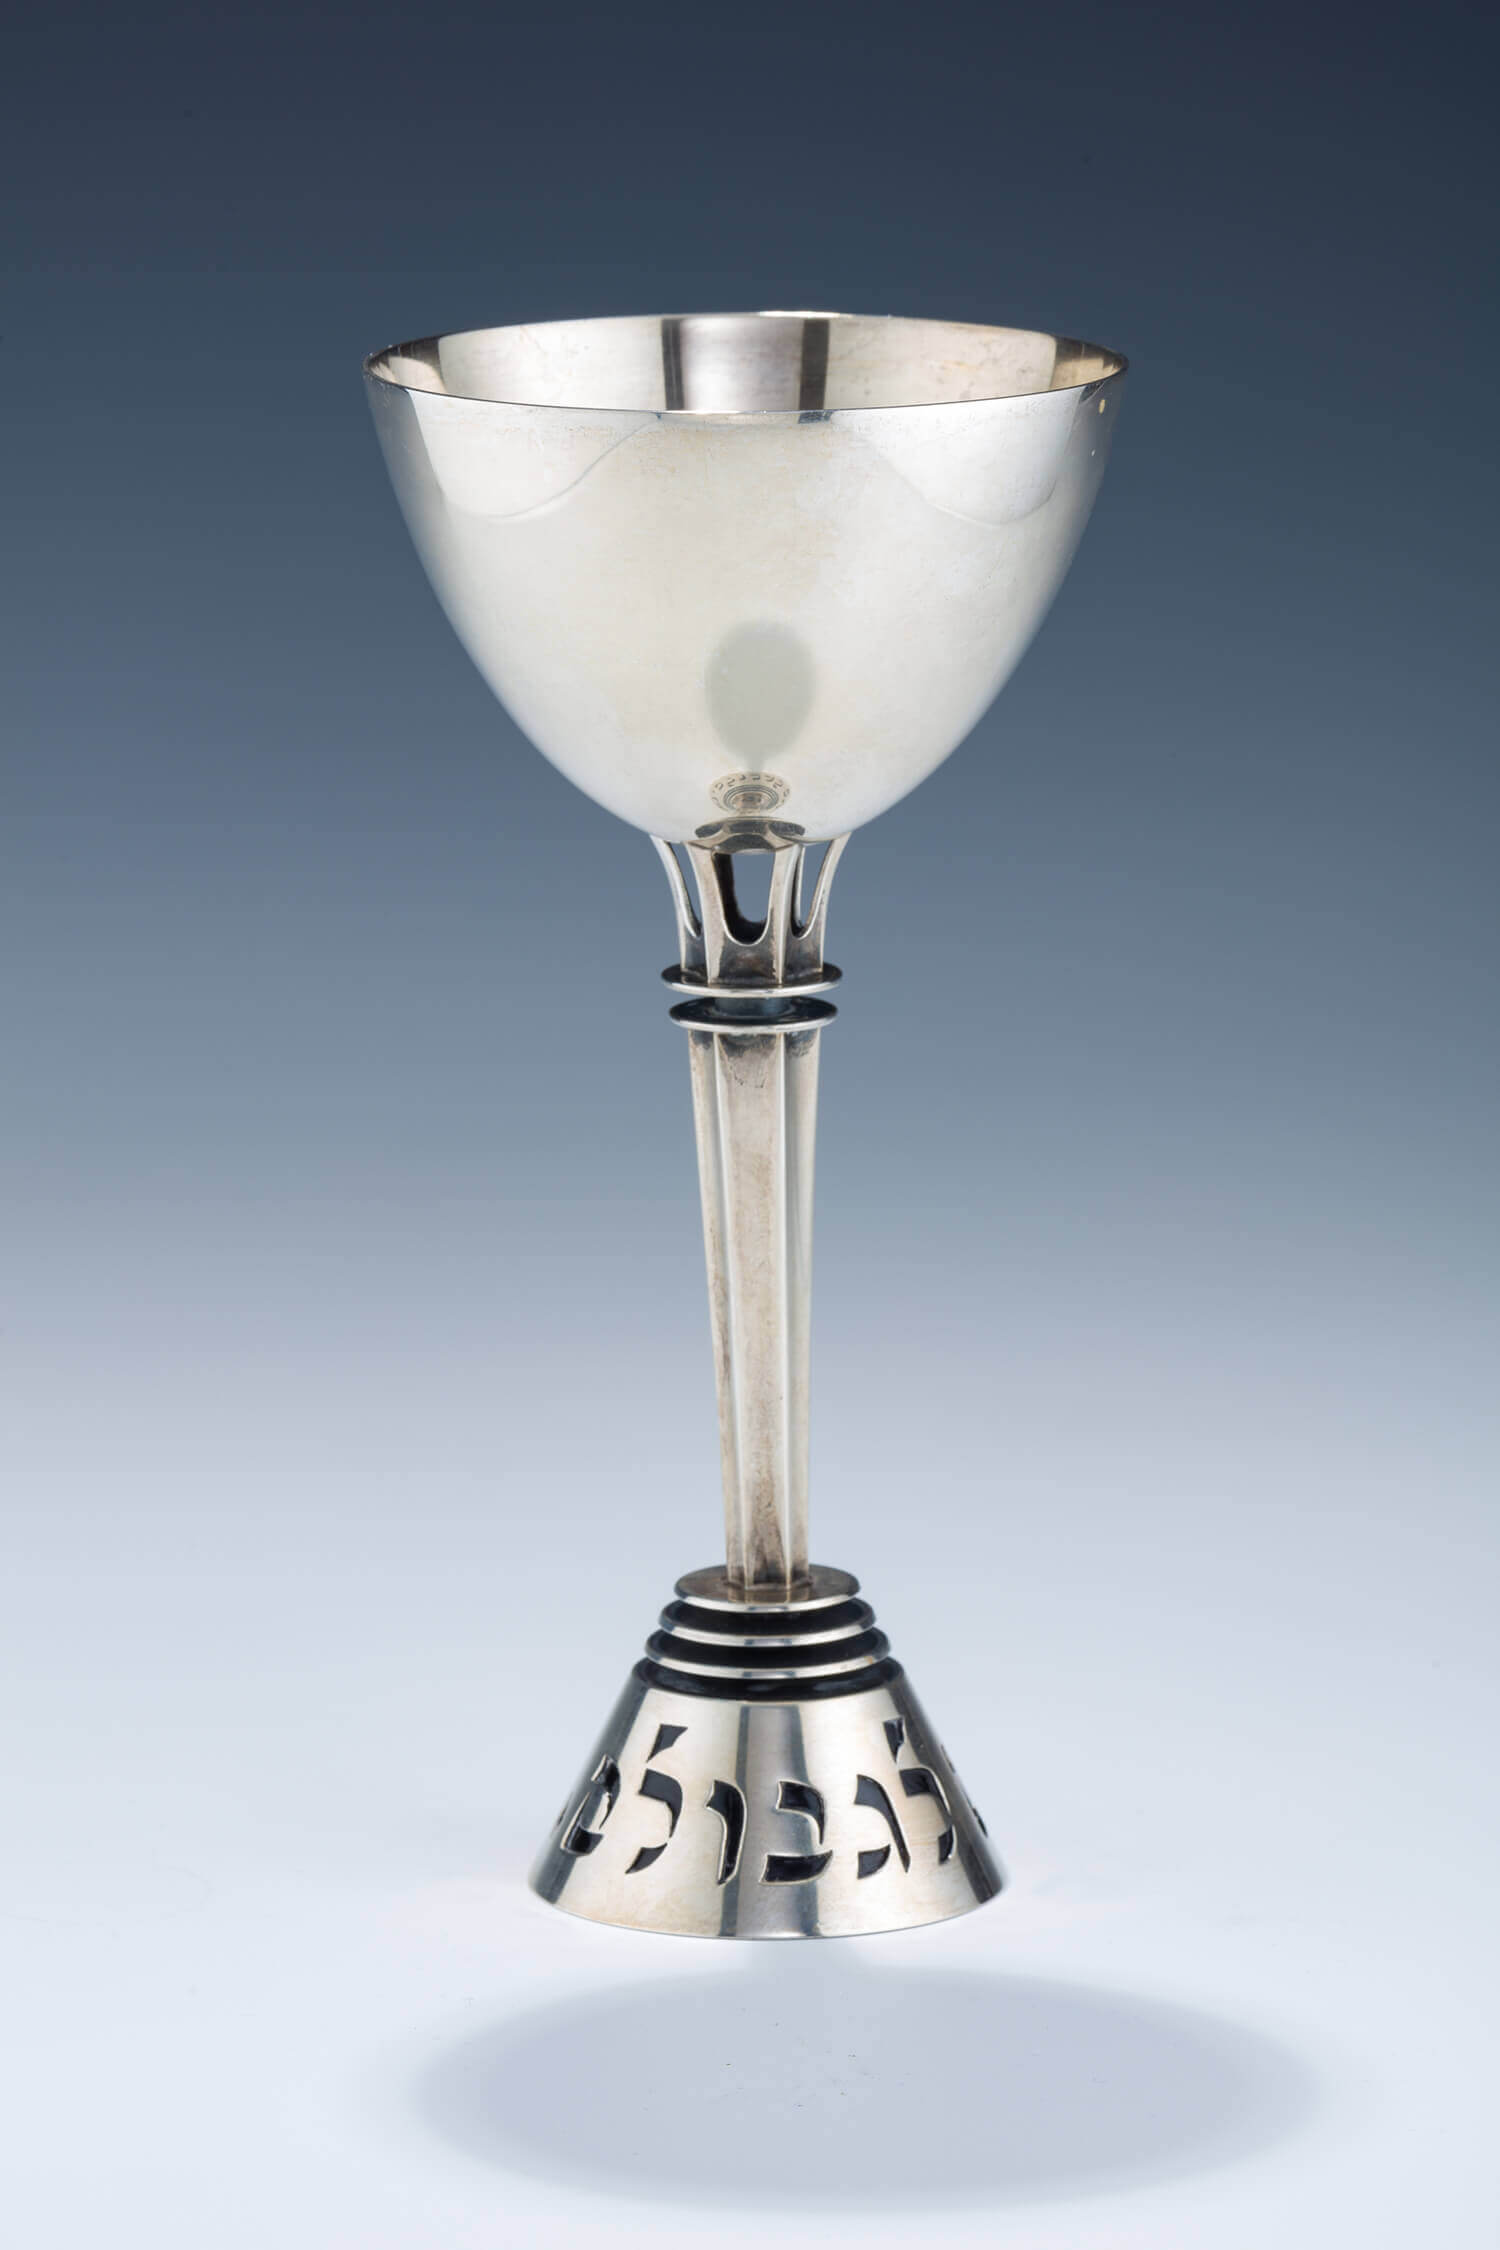 092. A LARGE AND RARE SILVER KIDDUSH CUP BY LUDWIG WOLPERT